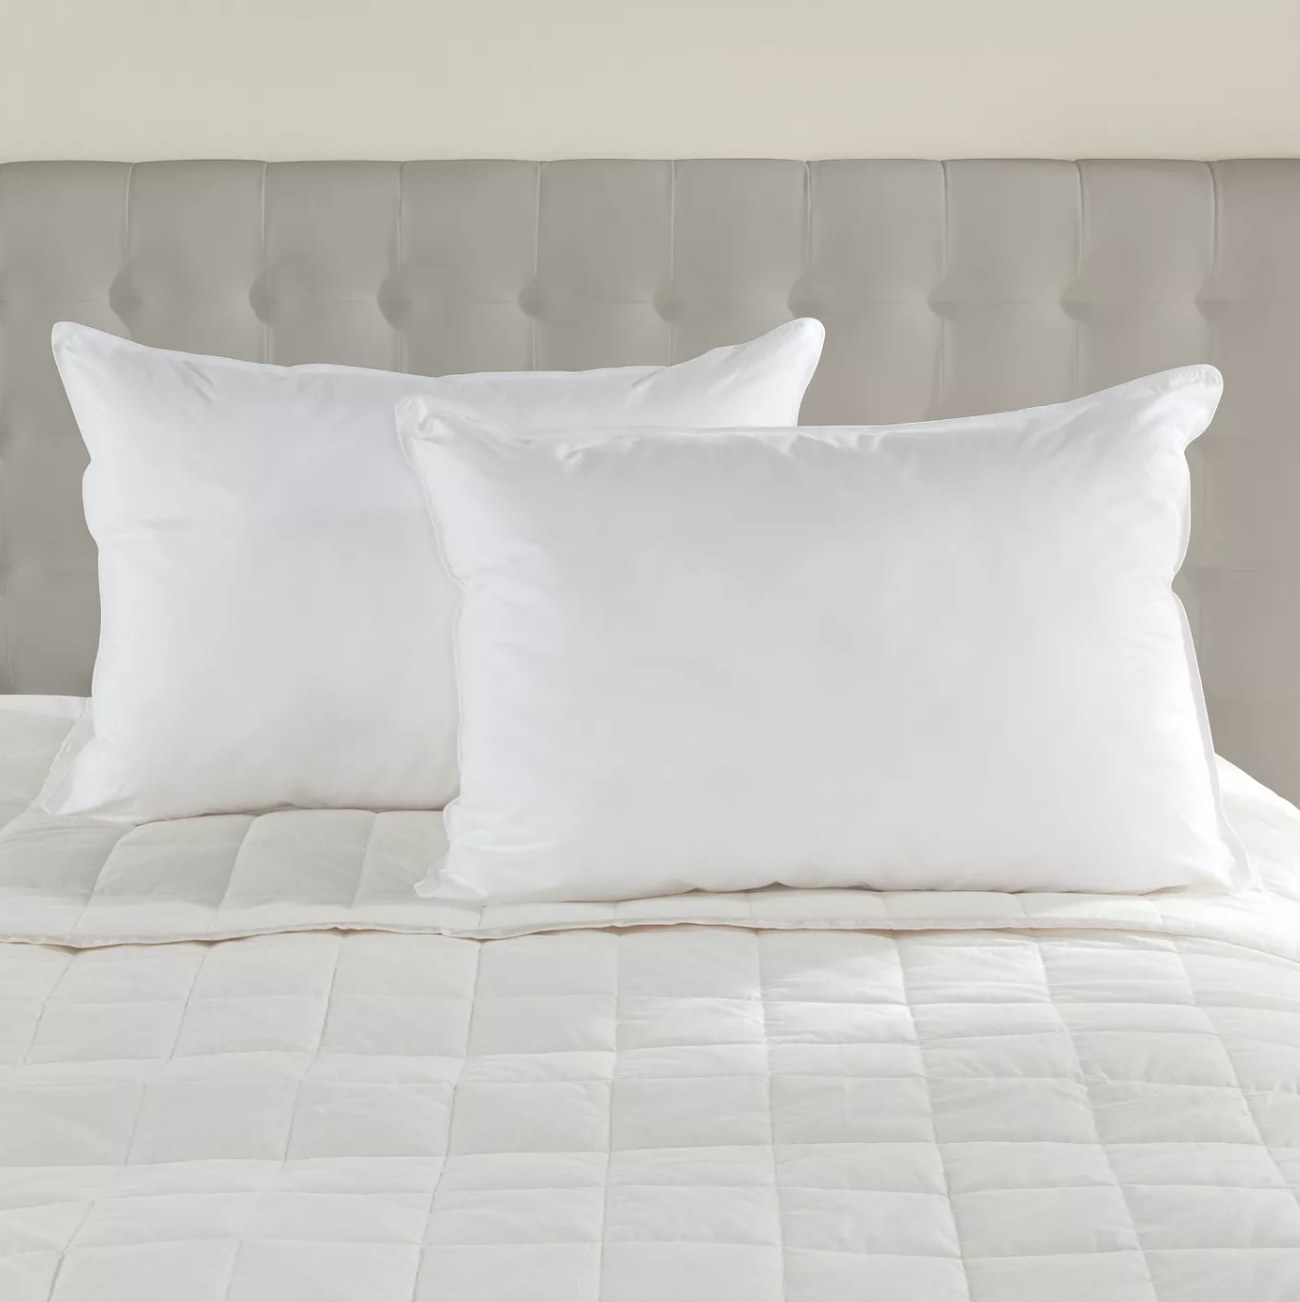 Two white pillows on a bed